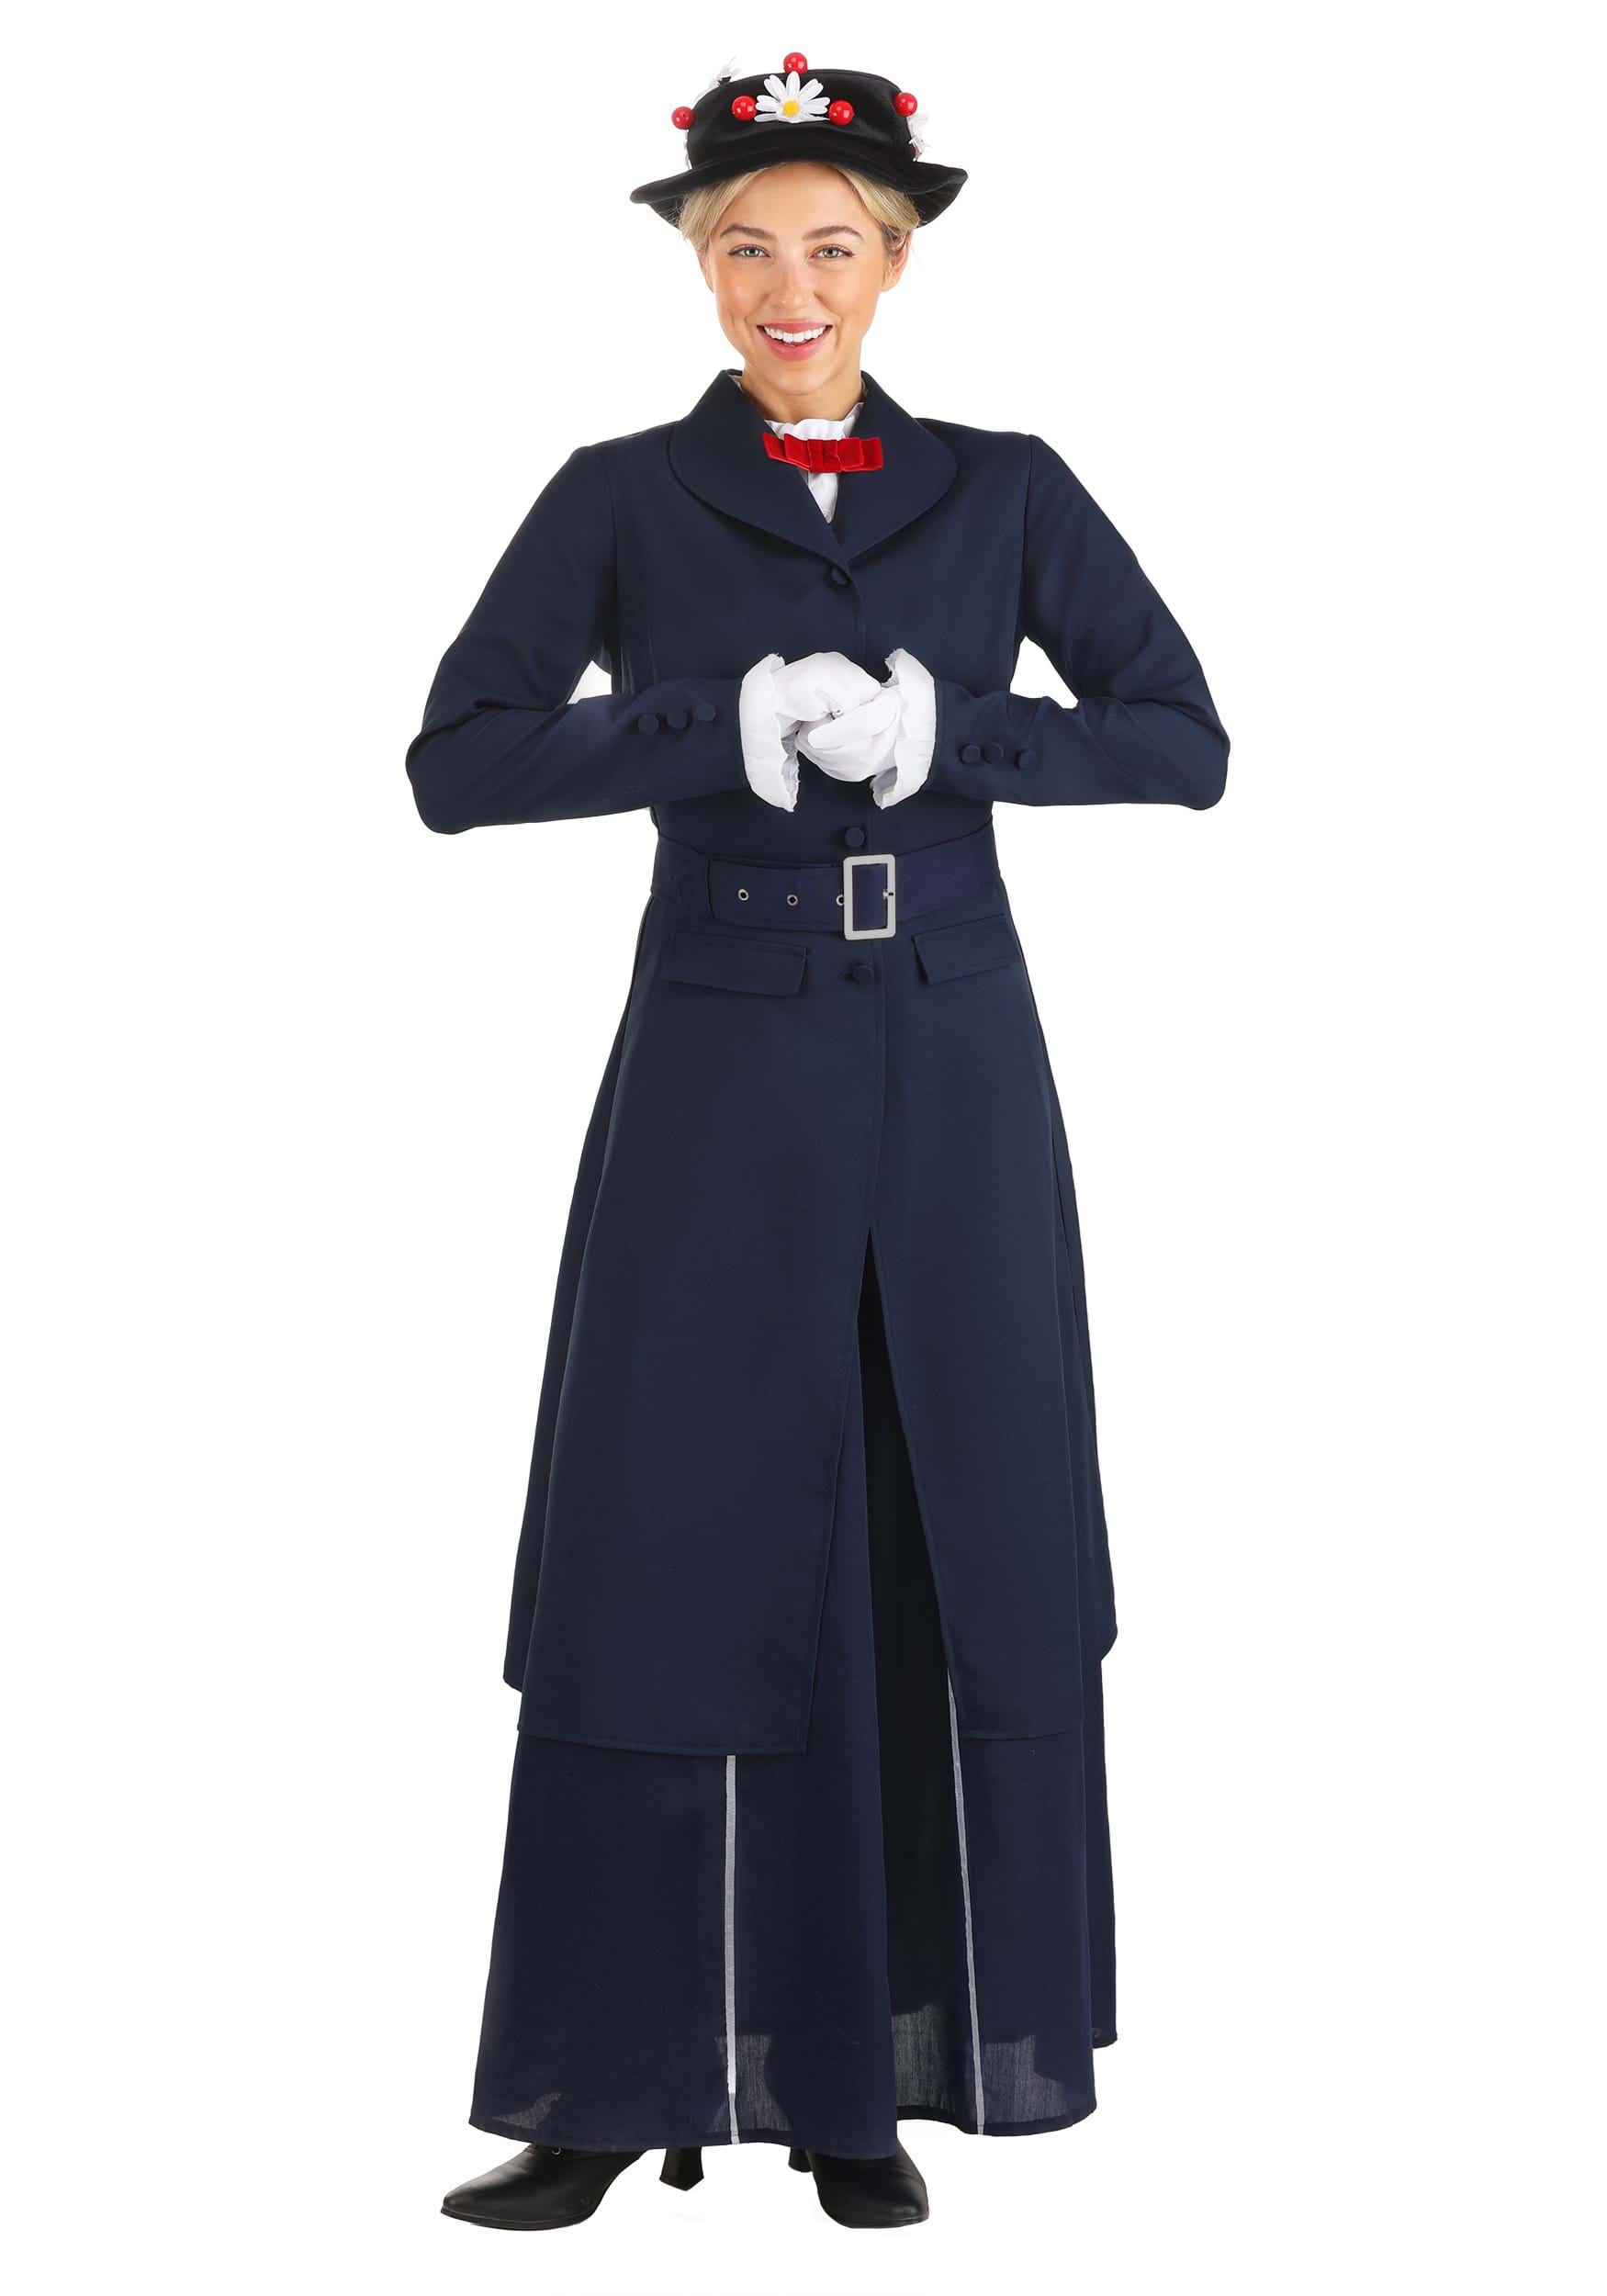 Photos - Fancy Dress Mary Poppins FUN Costumes  Costume for Women Blue/Red/White FUN2812 